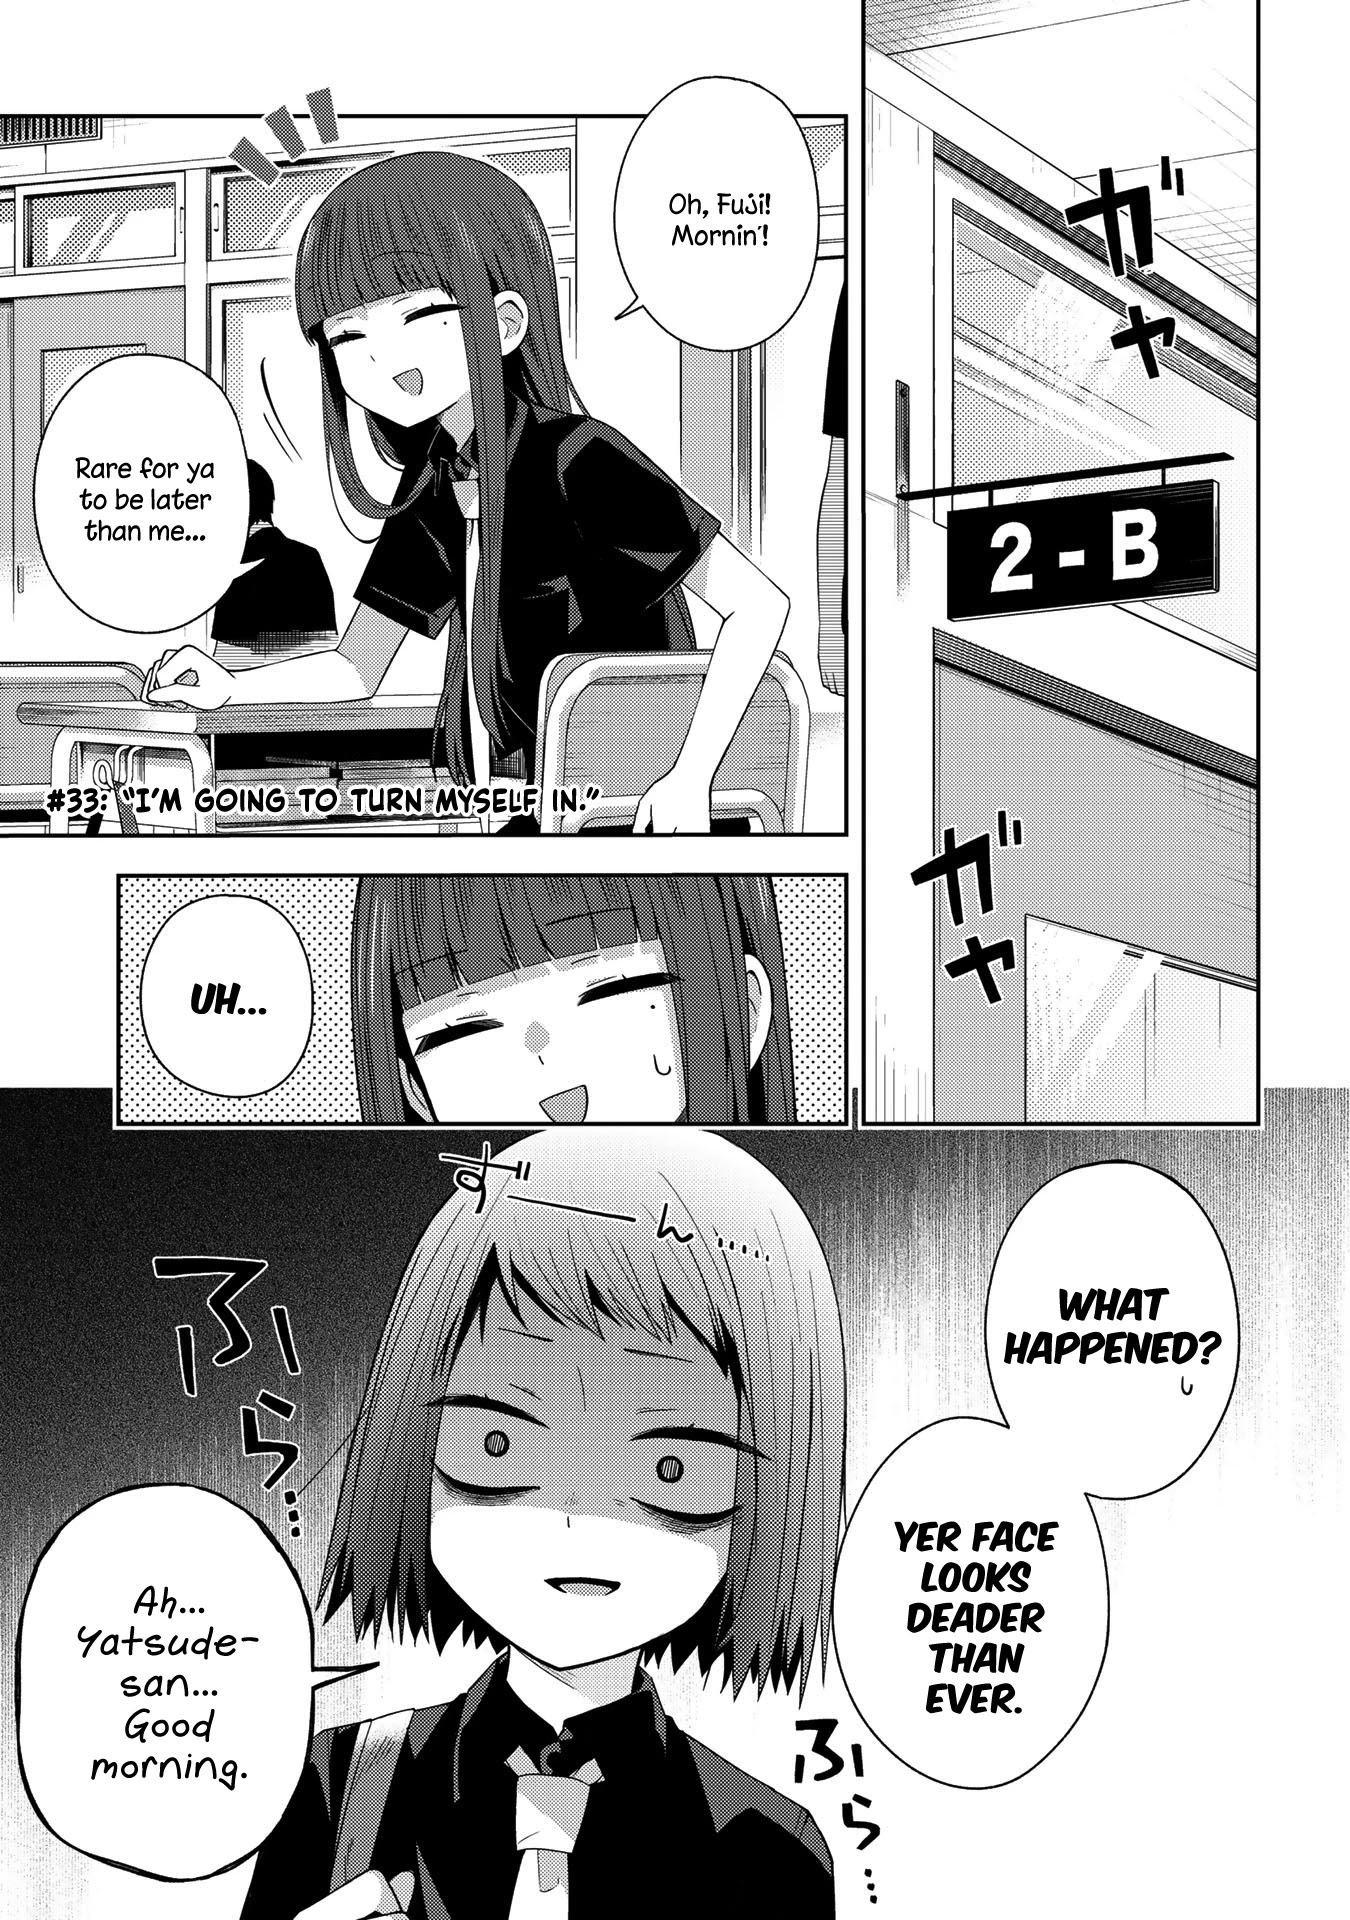 School Zone (Ningiyau) Chapter 33: I'm Going To Turn Myself In. - Picture 1